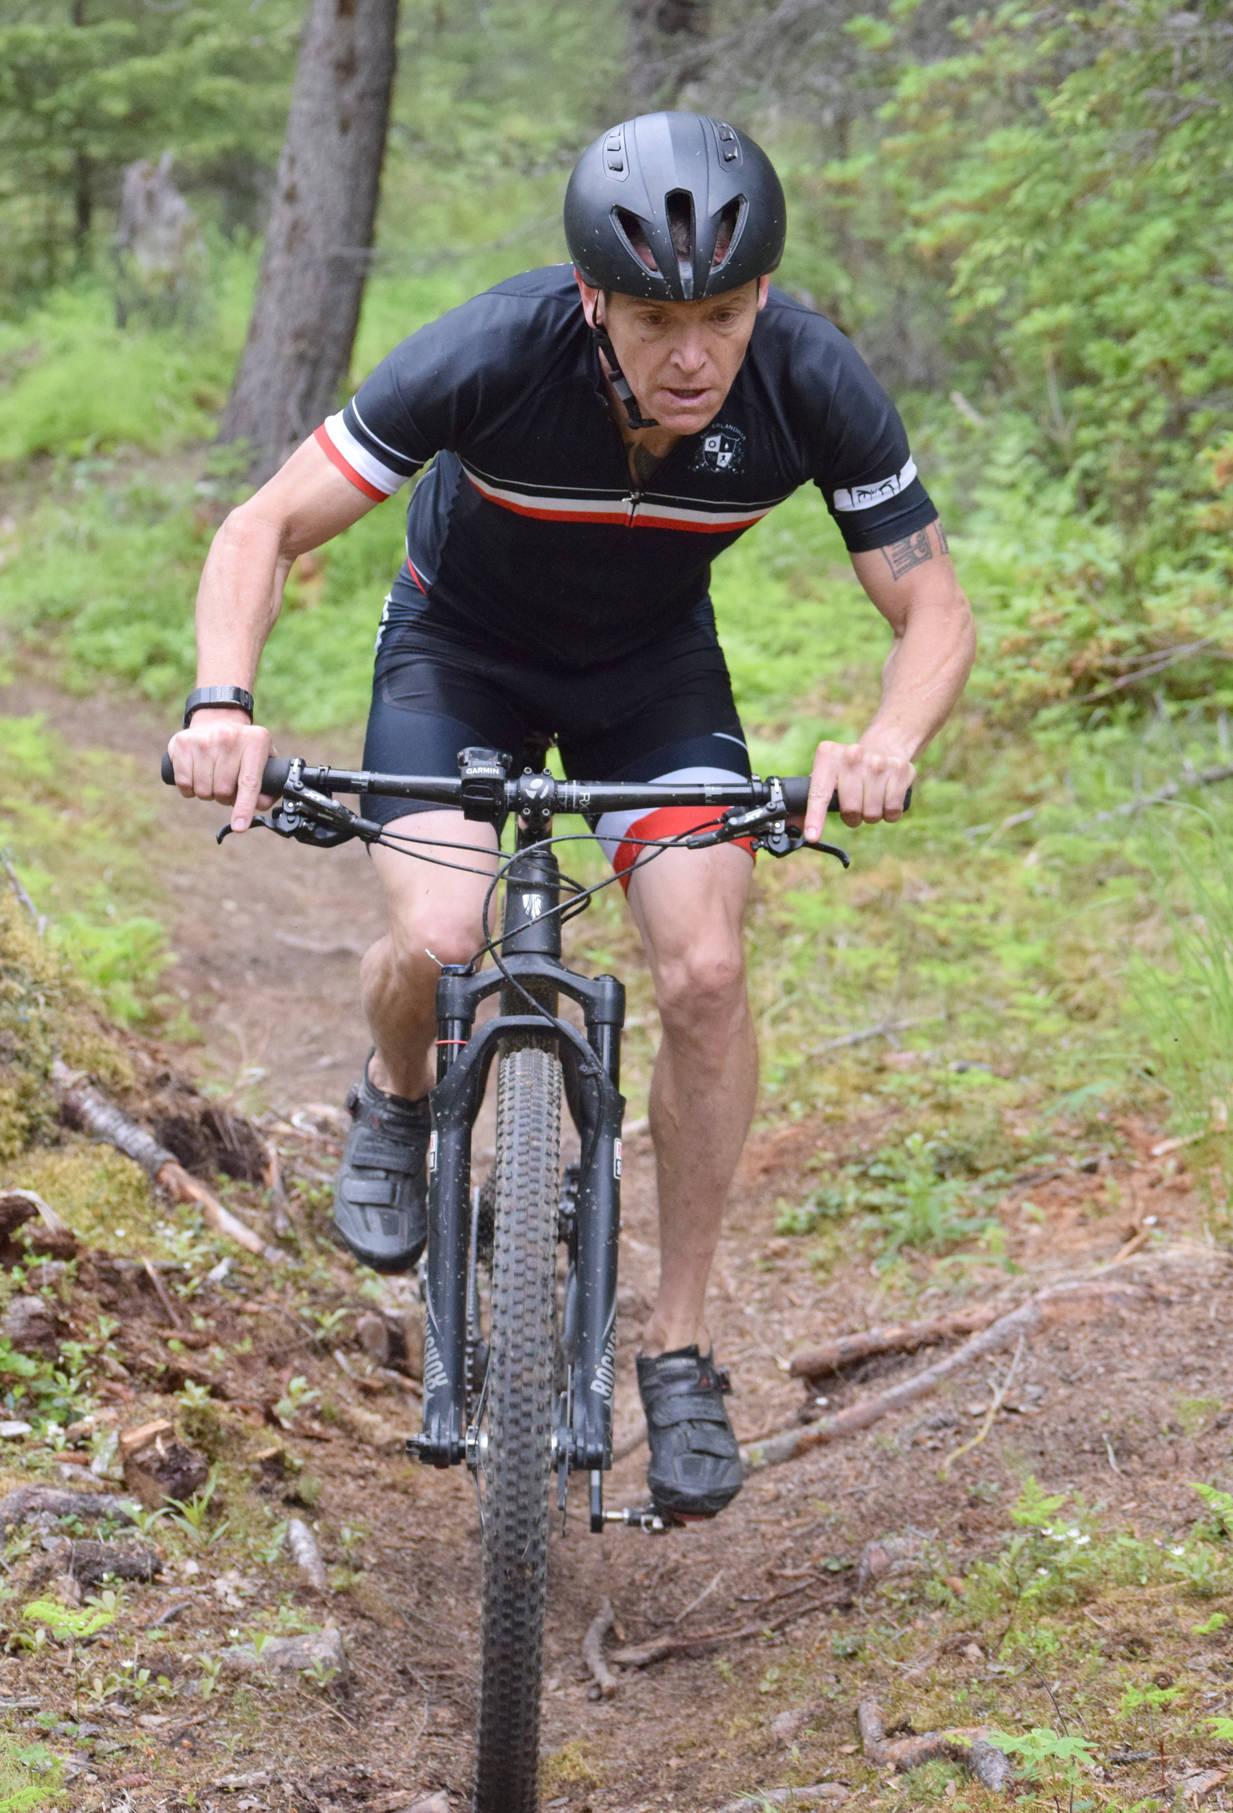 Mike Crawford negotiates roots on the singletrack portion of the bike leg at the Snippit Loppet Duathlon on Sunday, June 11, 2017, at Tsalteshi Trails. (Photo by Jeff Helminiak/Peninsula Clarion)